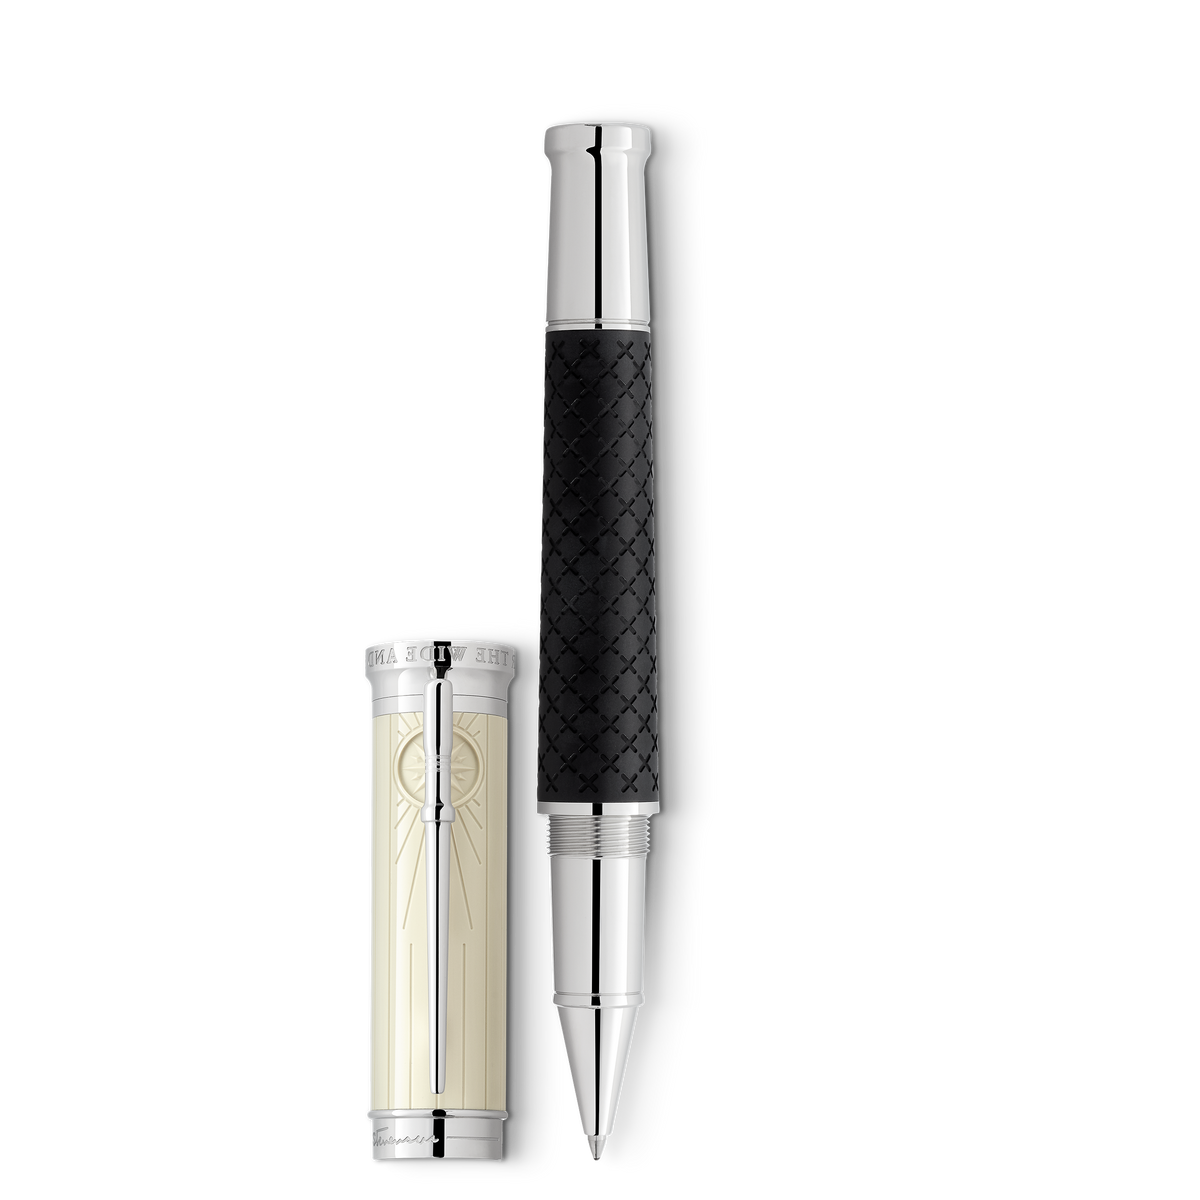 Writers Edition Homage to Robert Louis Stevenson Limited Edition Rollerball